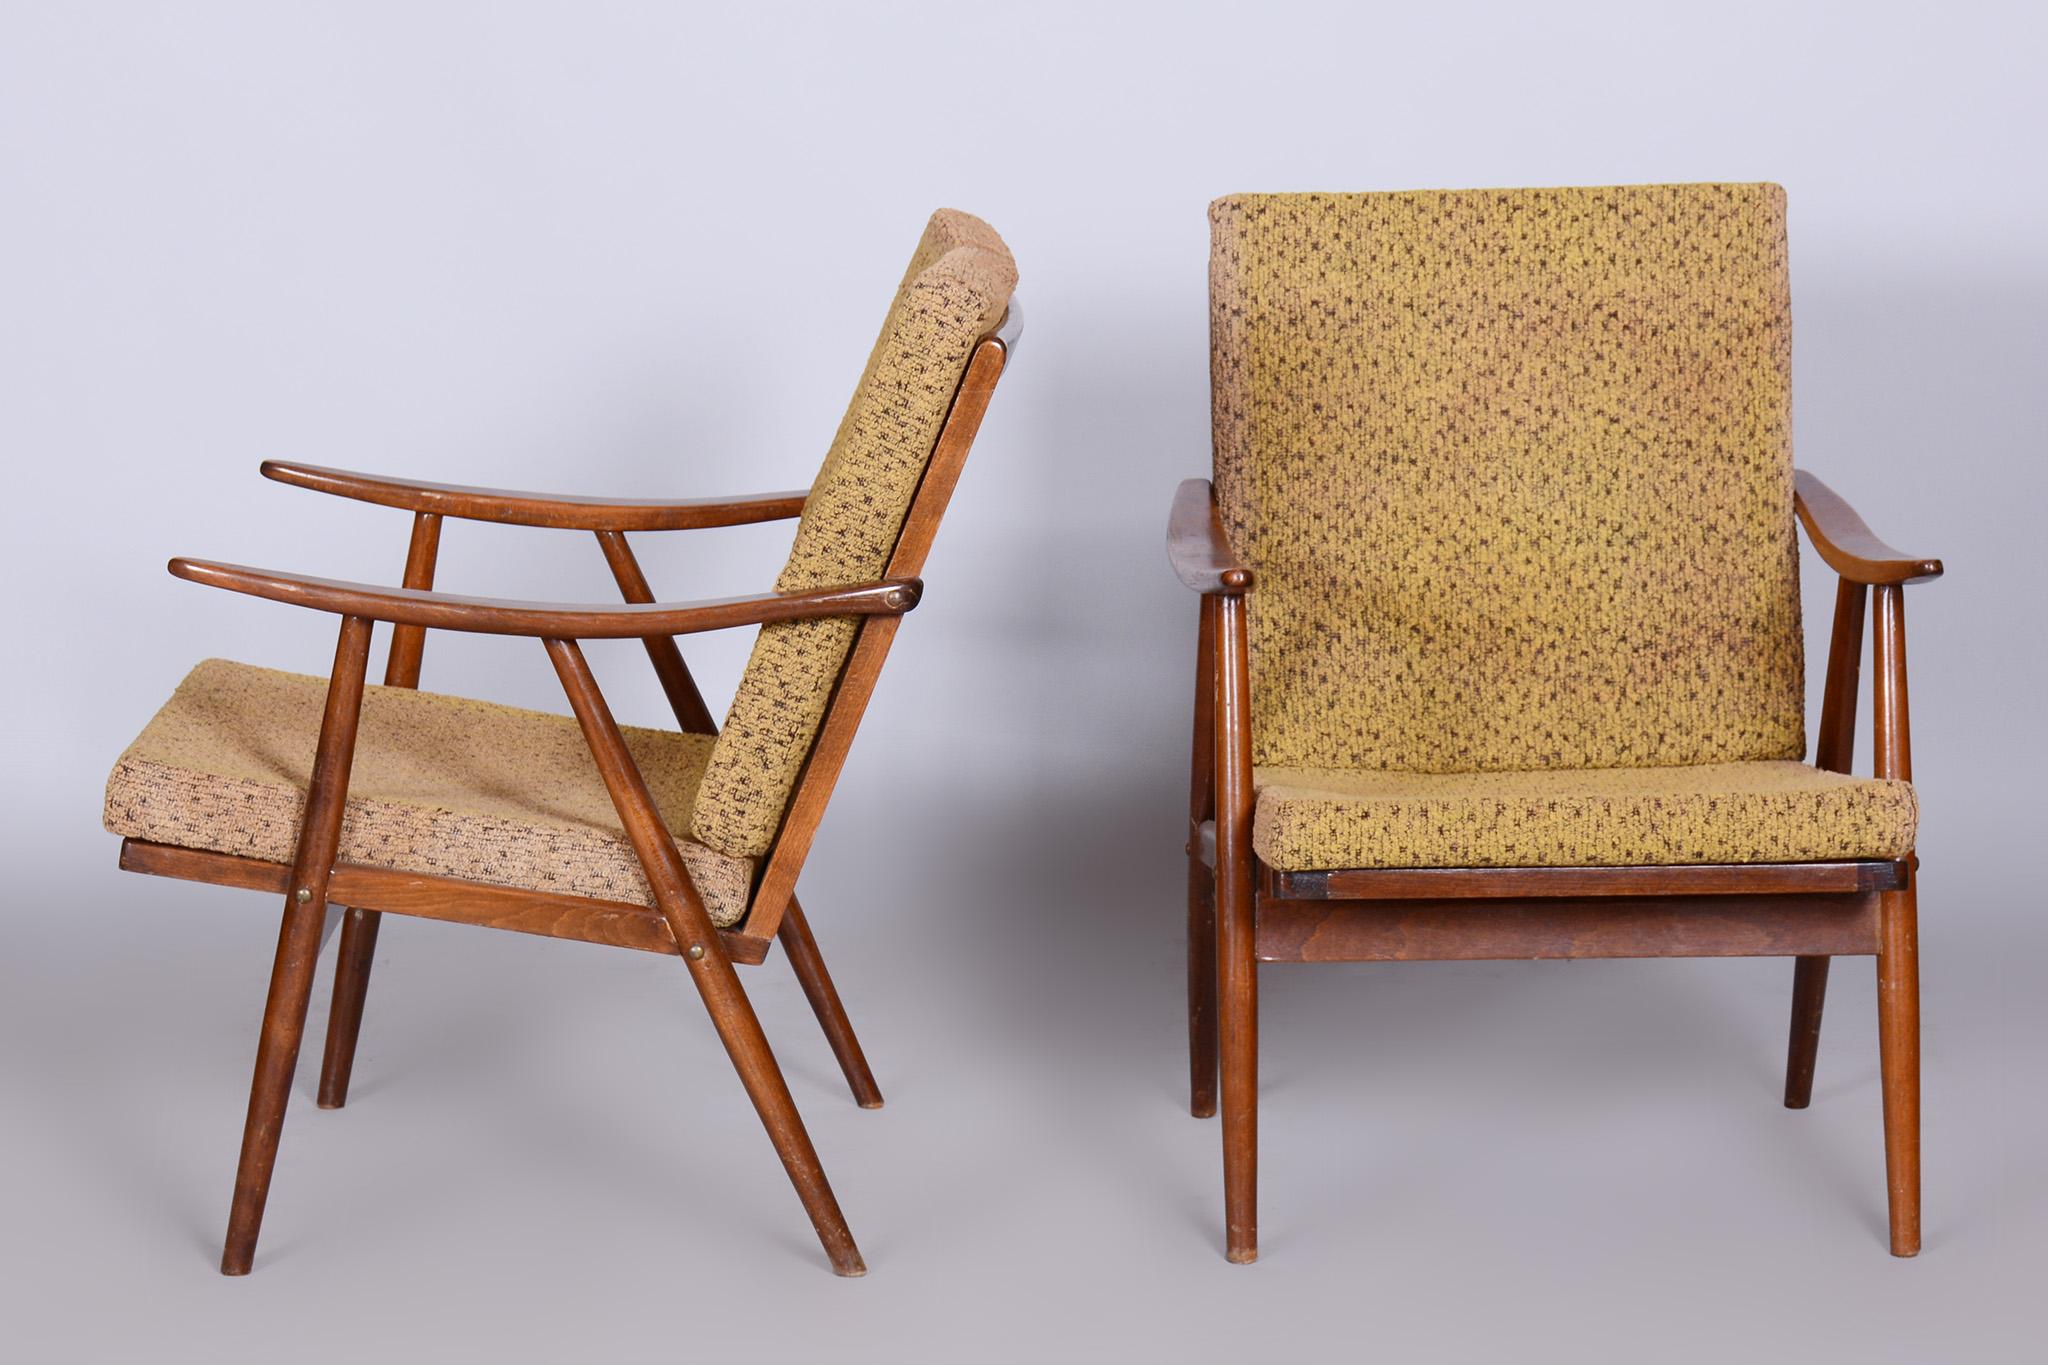 Pair of Midcentury Beech Armchairs, Úluv, Revived Polish, Czechia, 1960s For Sale 2